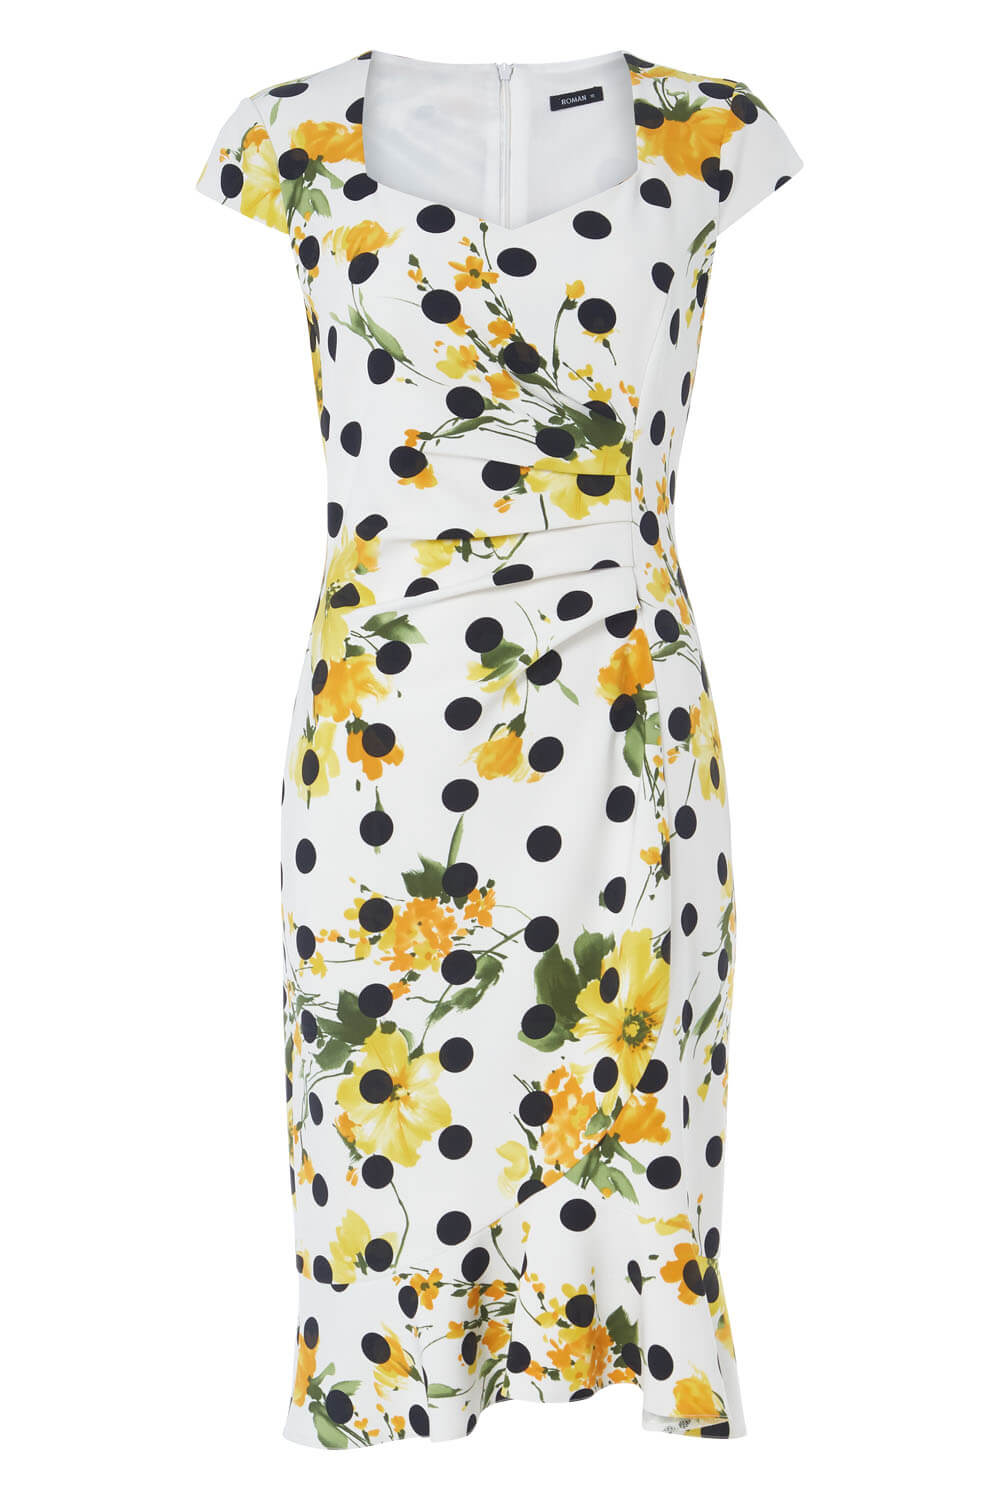 Floral Spot Fluted Fitted Scuba Dress in Yellow - Roman Originals UK